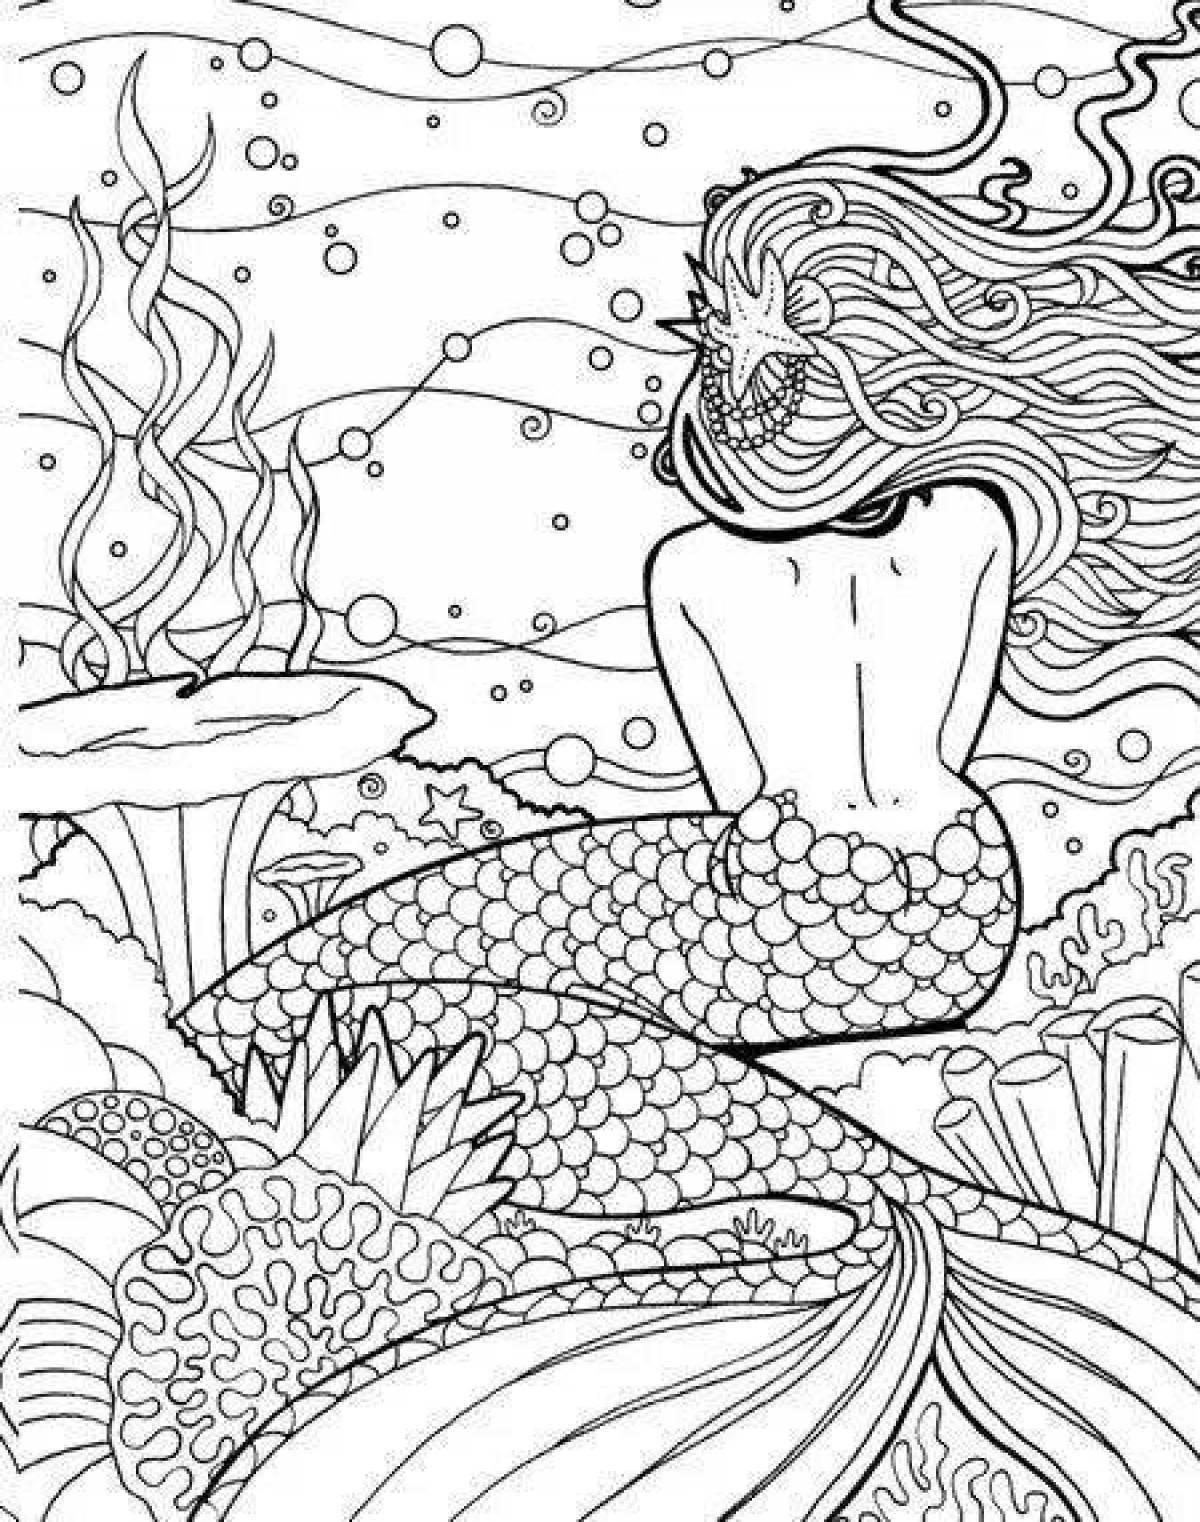 Harmonious coloring relaxation antistress for adults